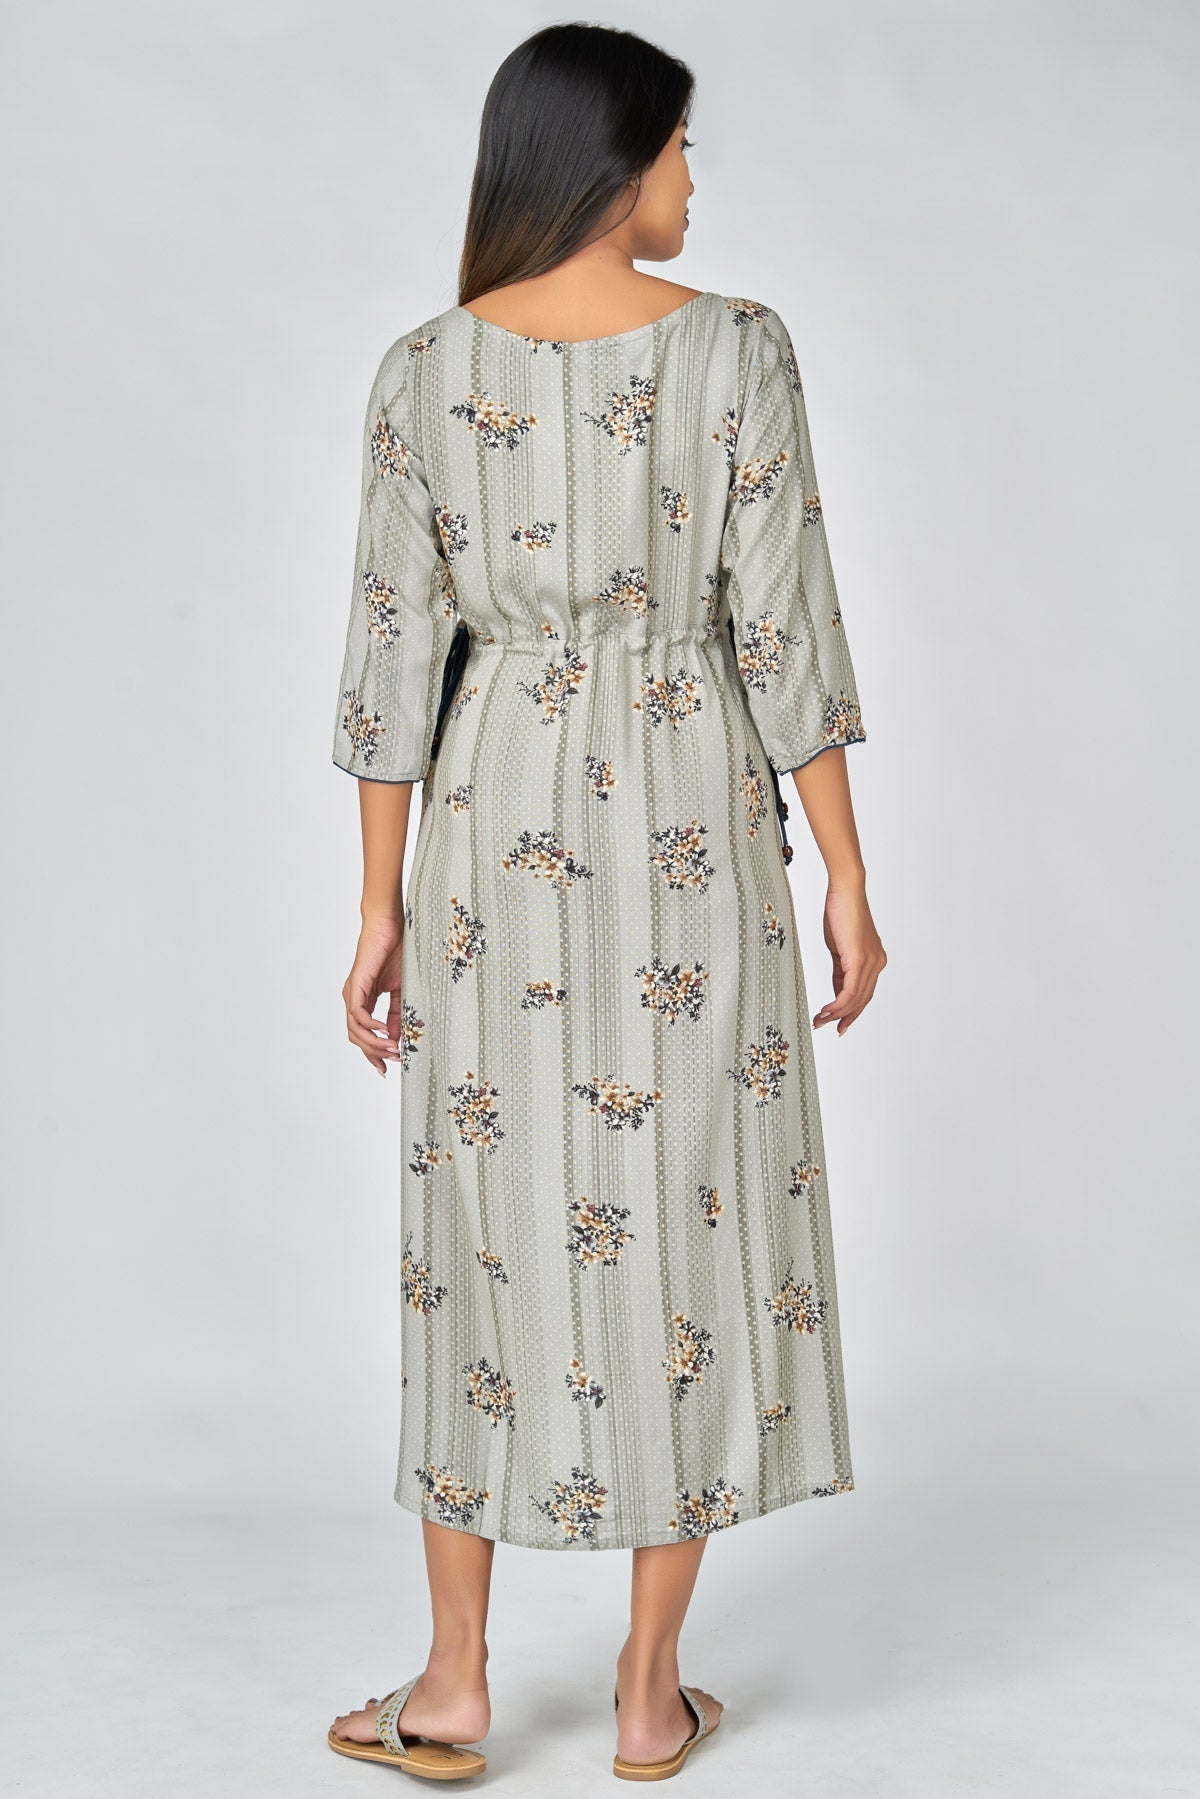 Floral & Dotted Print Maternity Long Dress- Grey